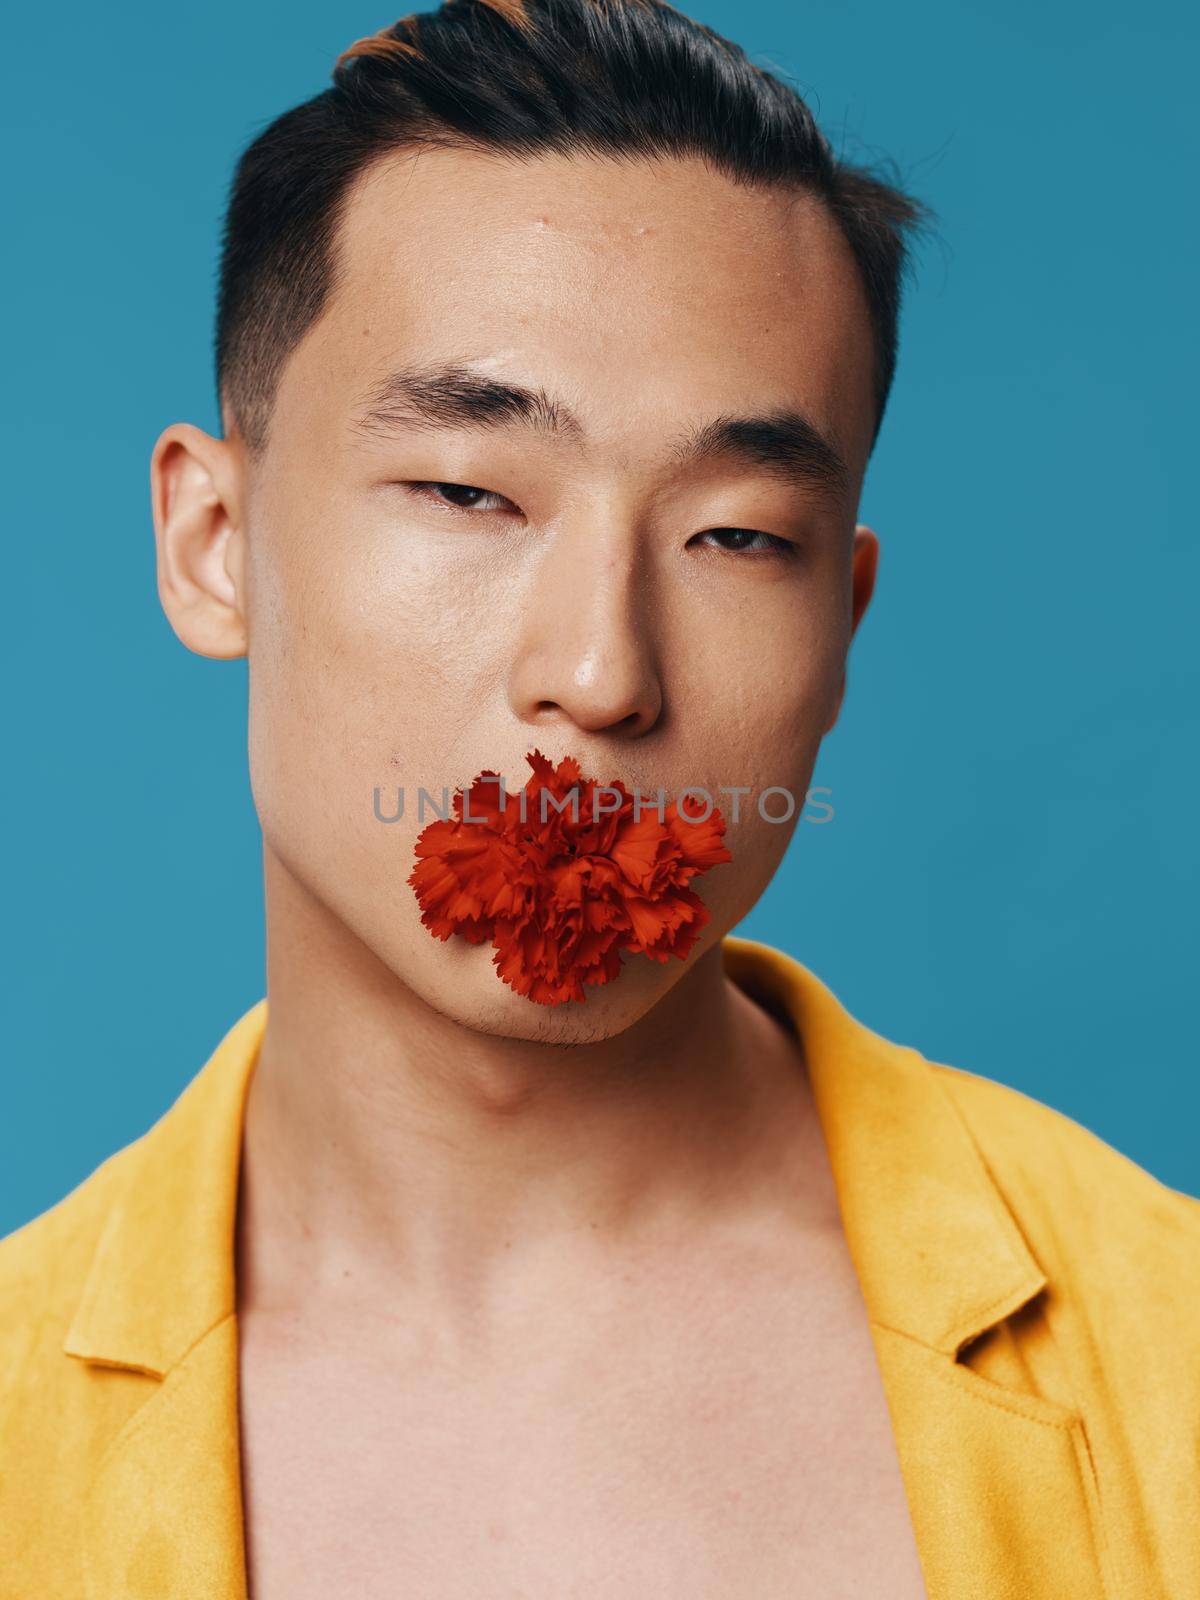 Romantic Korean man with a flower in his mouth on a blue background by SHOTPRIME